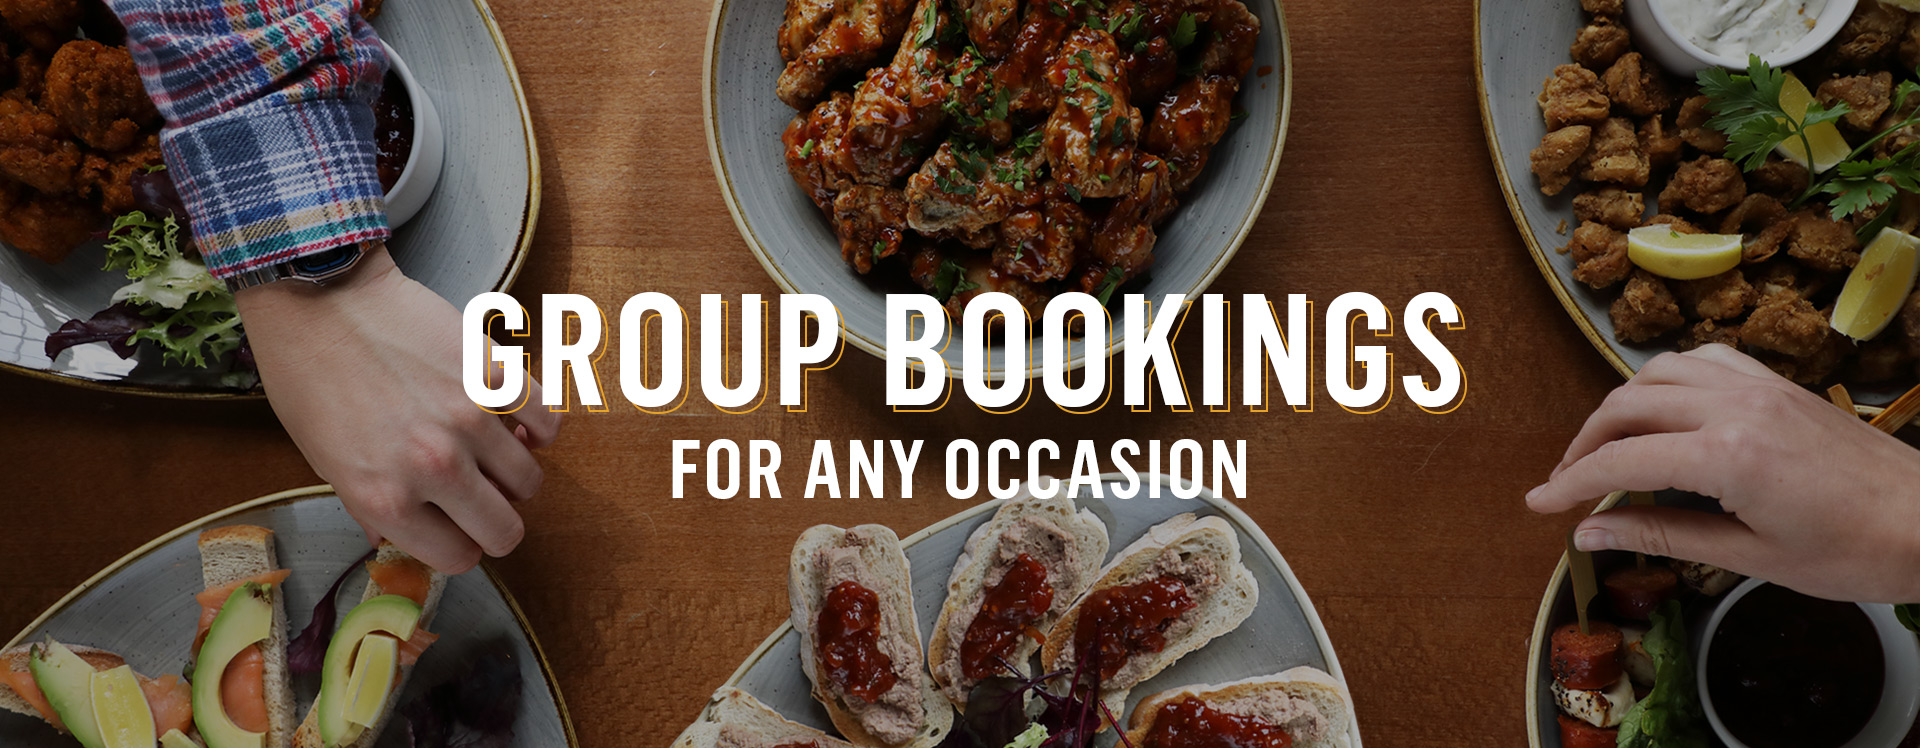 Group Bookings at The Old Buttermarket